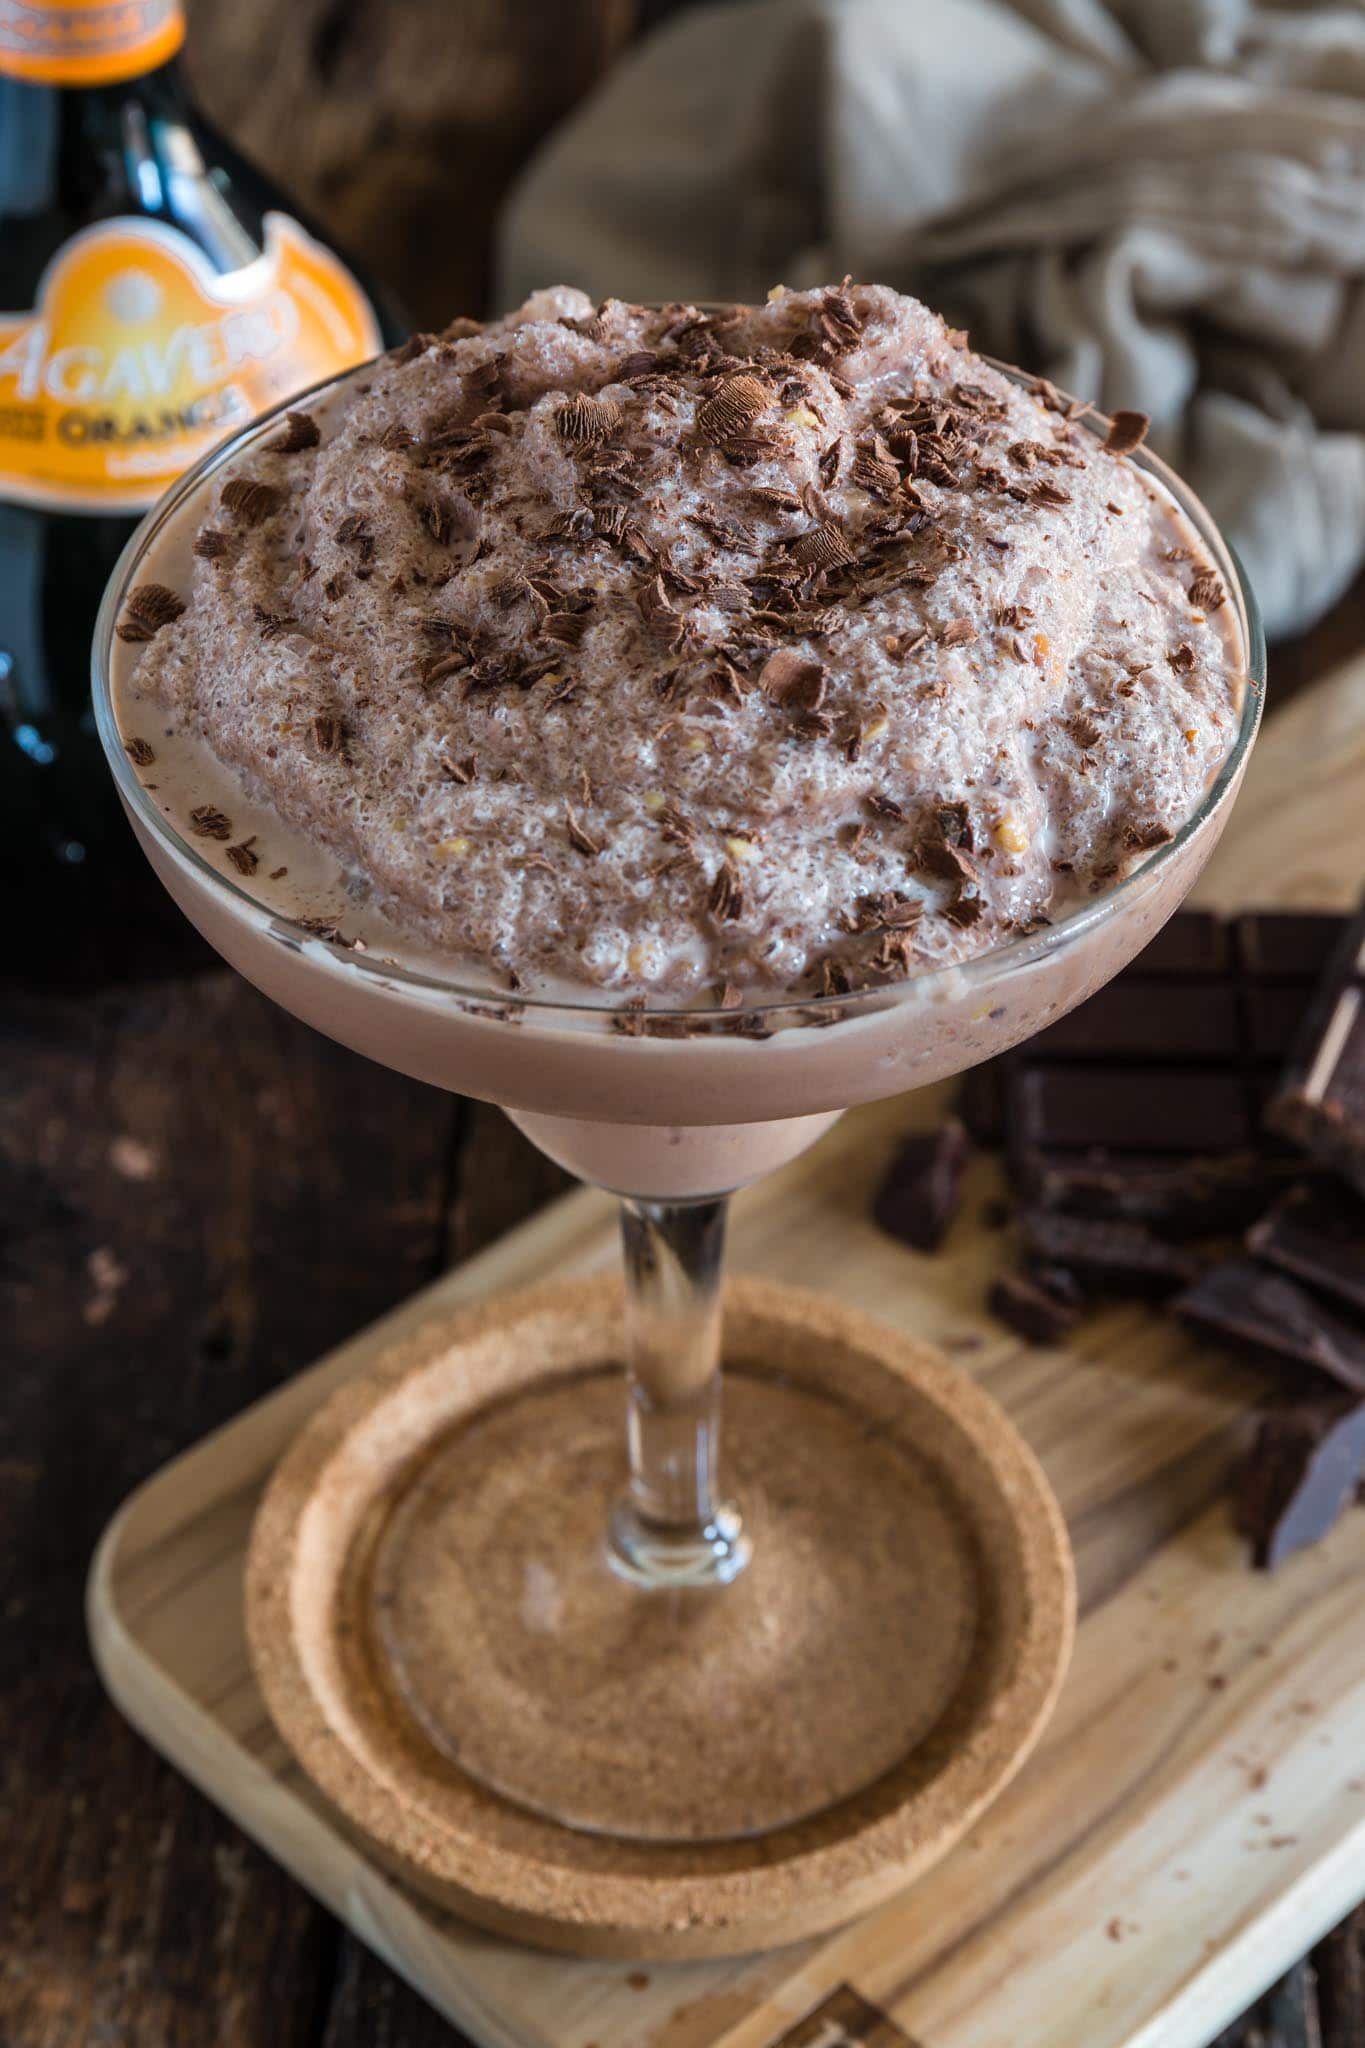 Frozen Chocolate Margarita | www.oliviascuisine.com | What's better than a frozen Margarita? A CHOCOLATE Margarita, of course! Made with chocolate ice cream, tequila and Agavero orange liqueur. (Recipe and food photography by @oliviascuisine.)